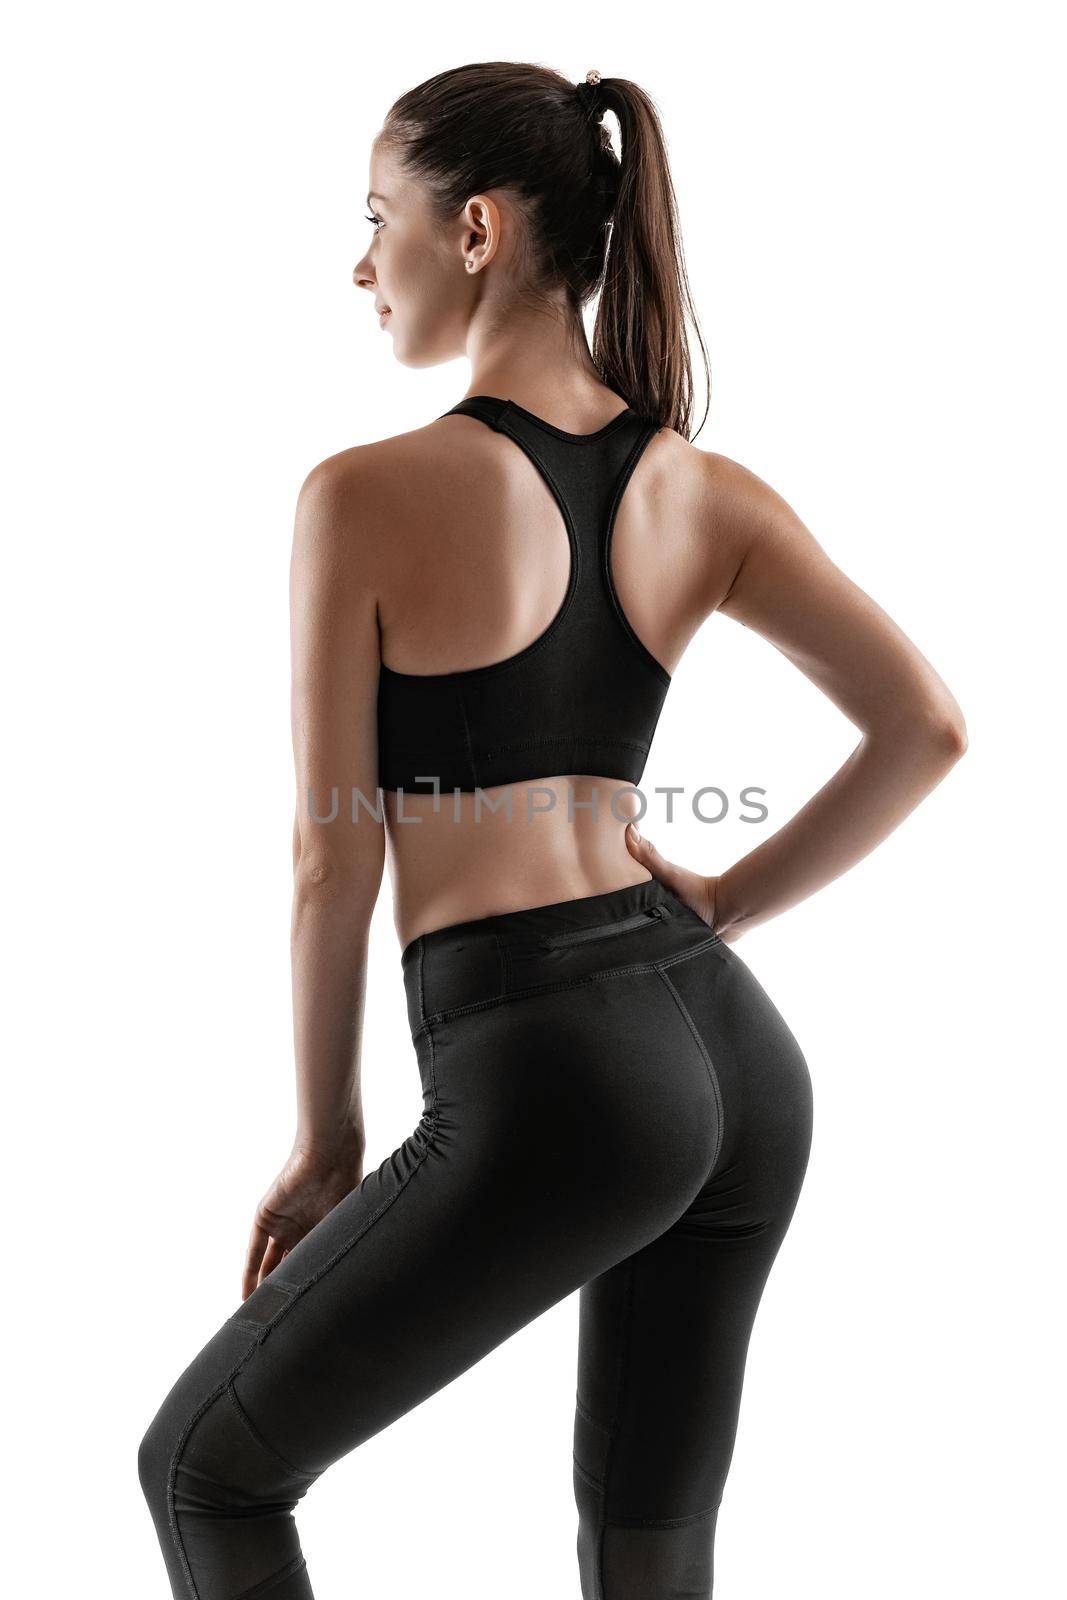 Strong brunette maiden with a ponytail, in black leggings, top and sneakers is posing standing back to the camera isolated on white background. Chic muscular body, fitness, gym, healthy lifestyle concept. Close-up portrait.